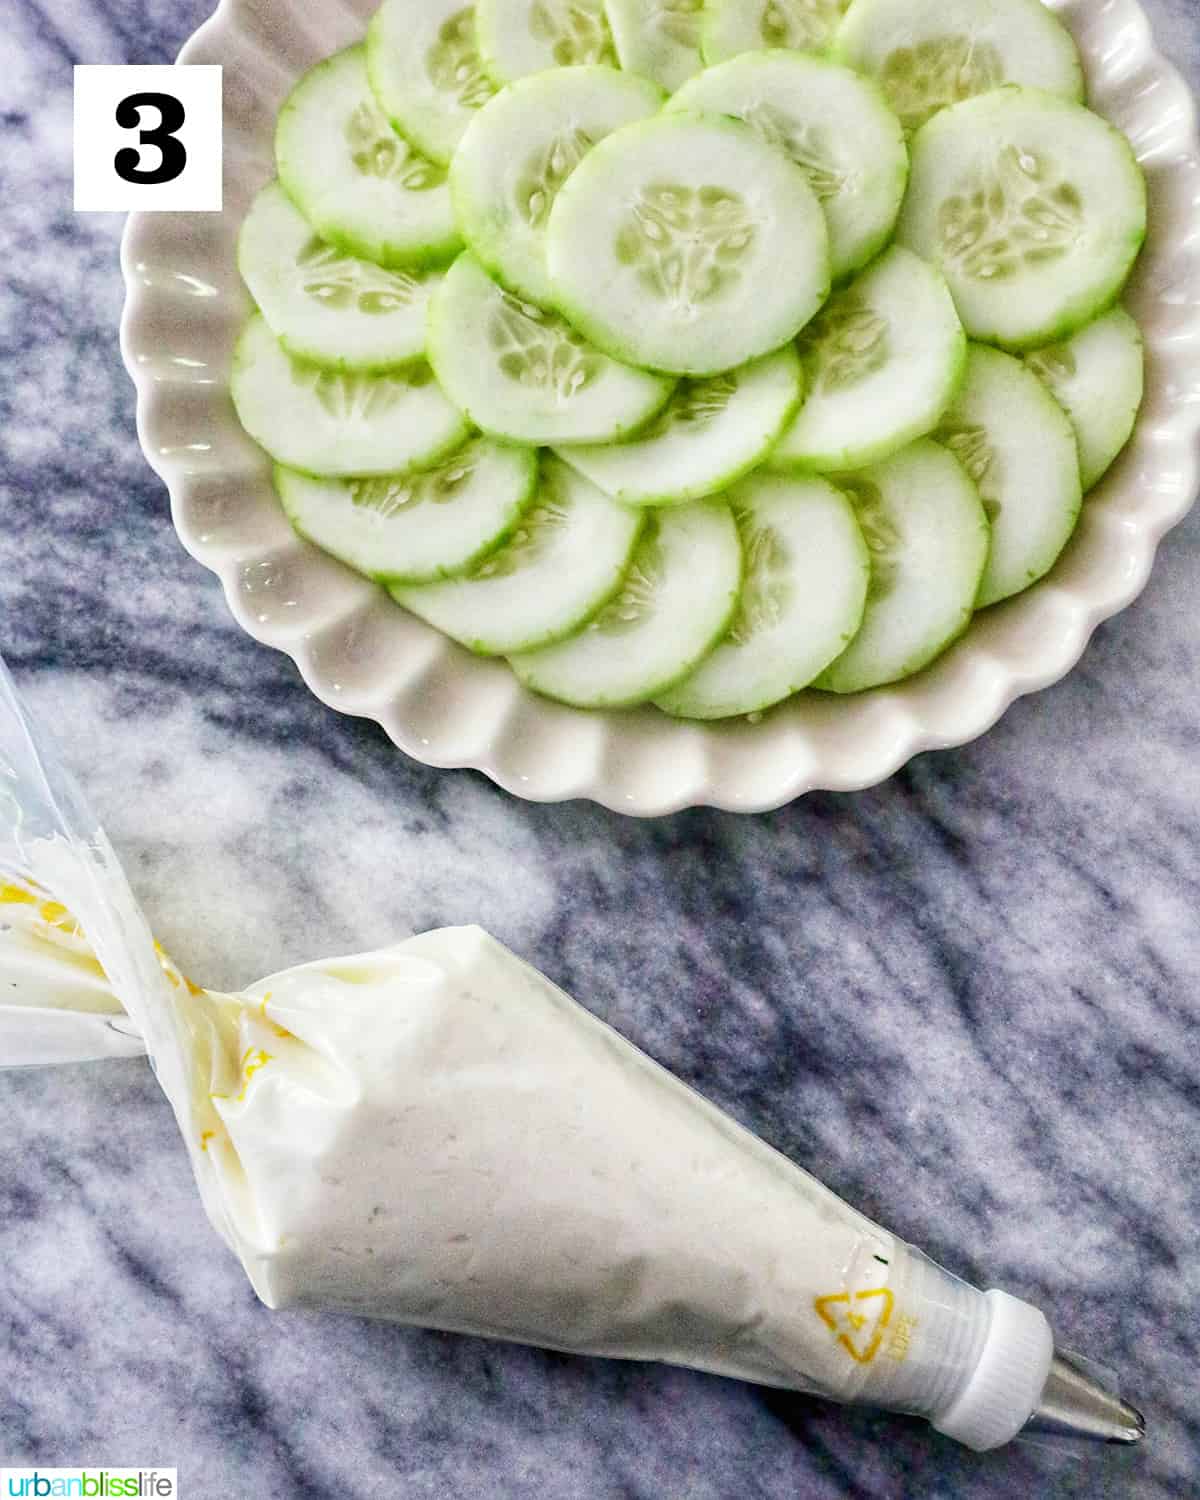 plate with fanned out cucumber slices next to a pastry bag with cream cheese on a marble countertop.